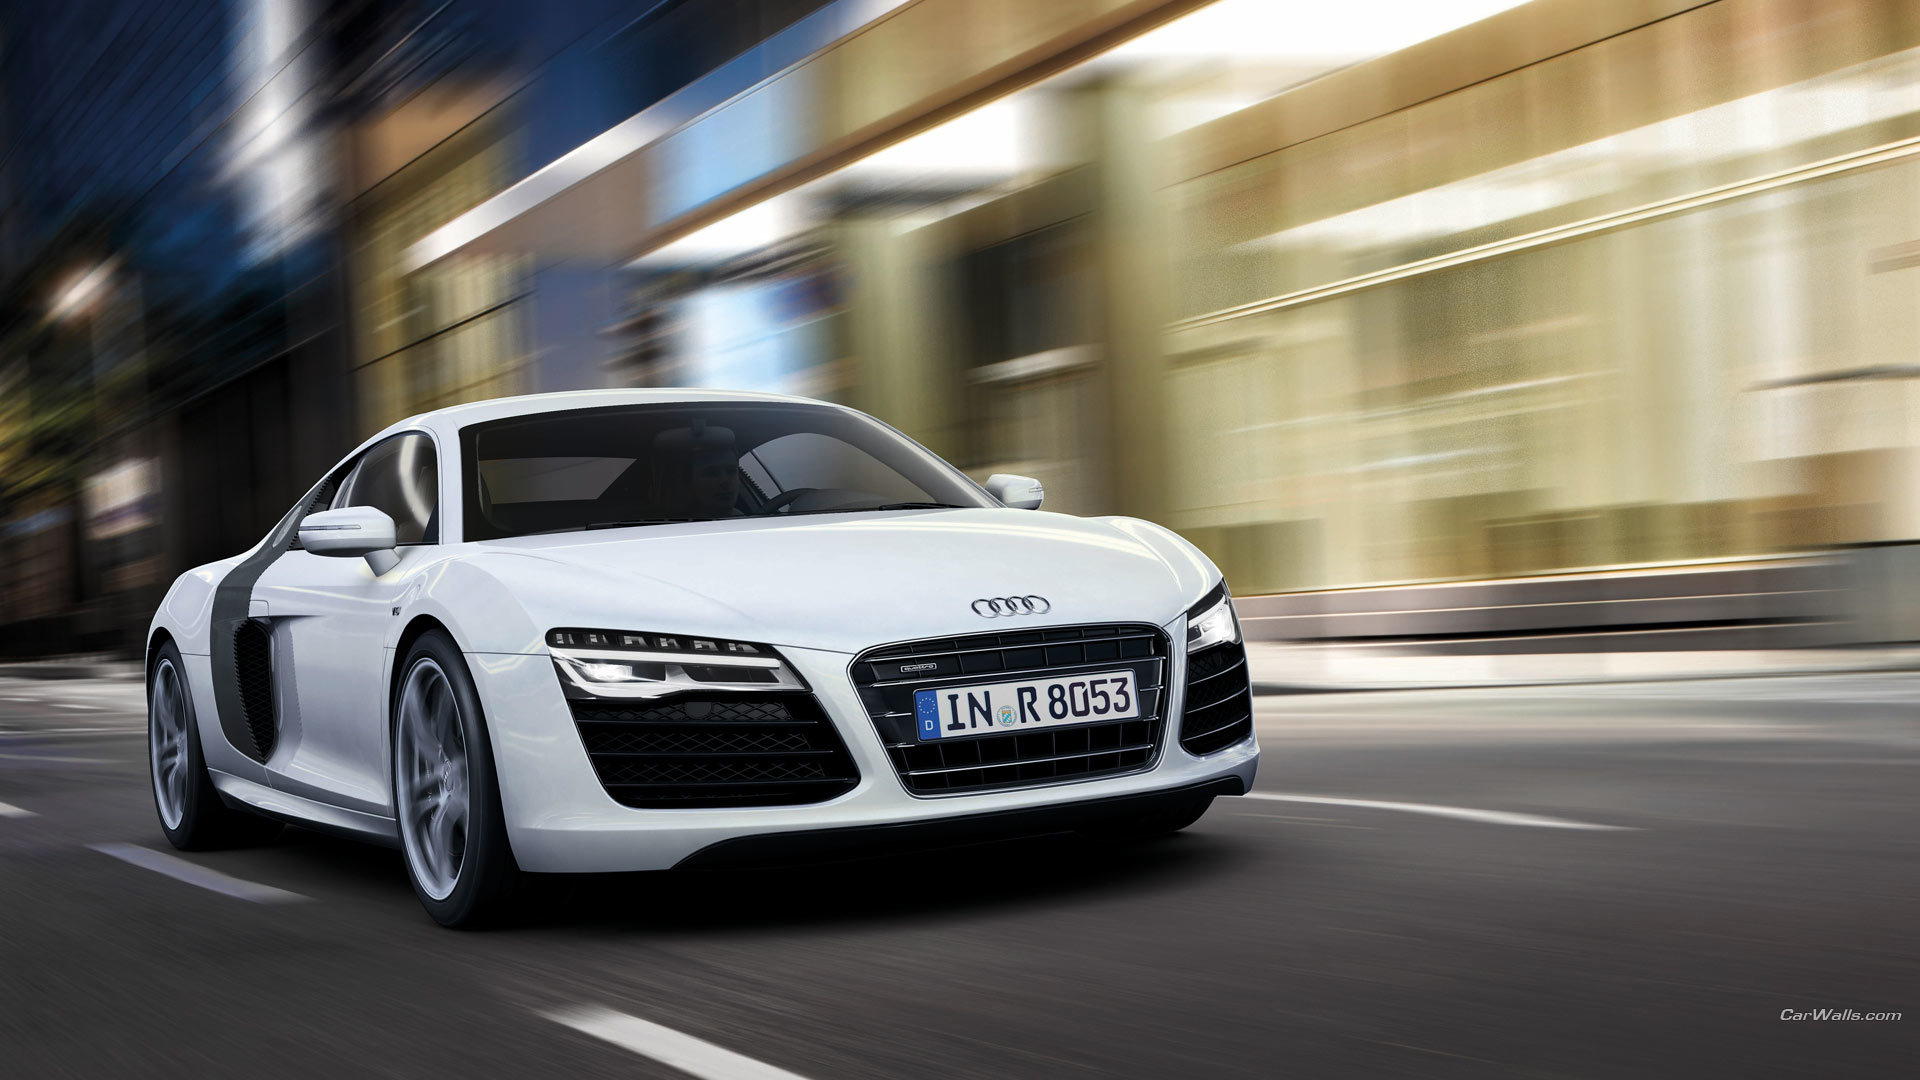 Best Audi R8 wallpaper ID:452665 for High Resolution full hd 1080p PC